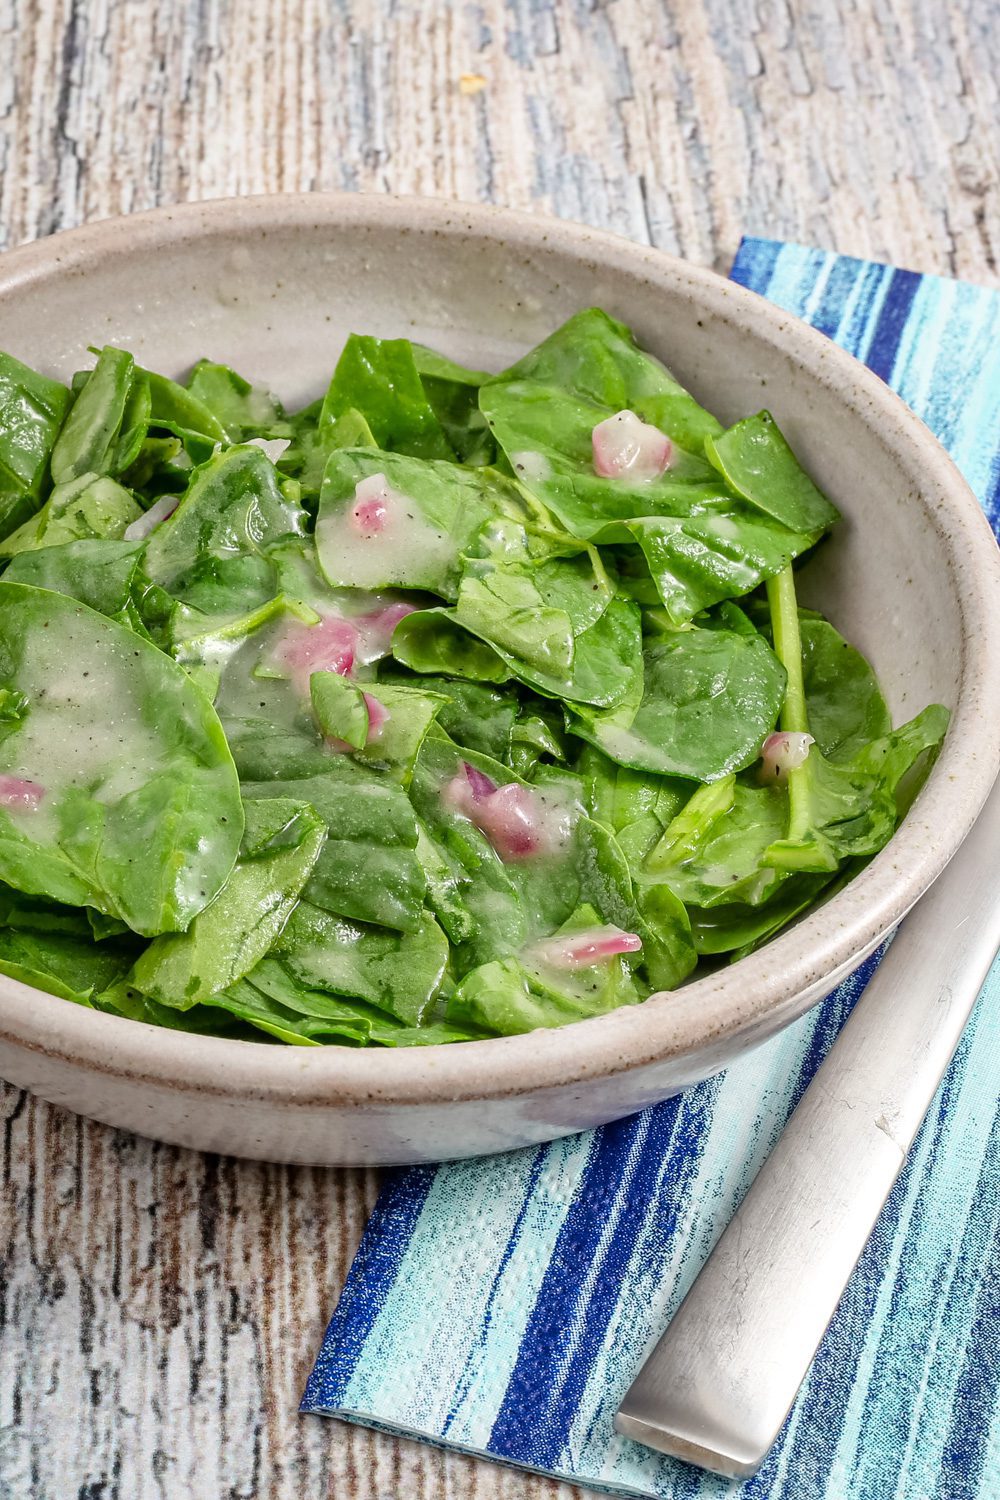 A serving of wilted spinach salad in a bowl